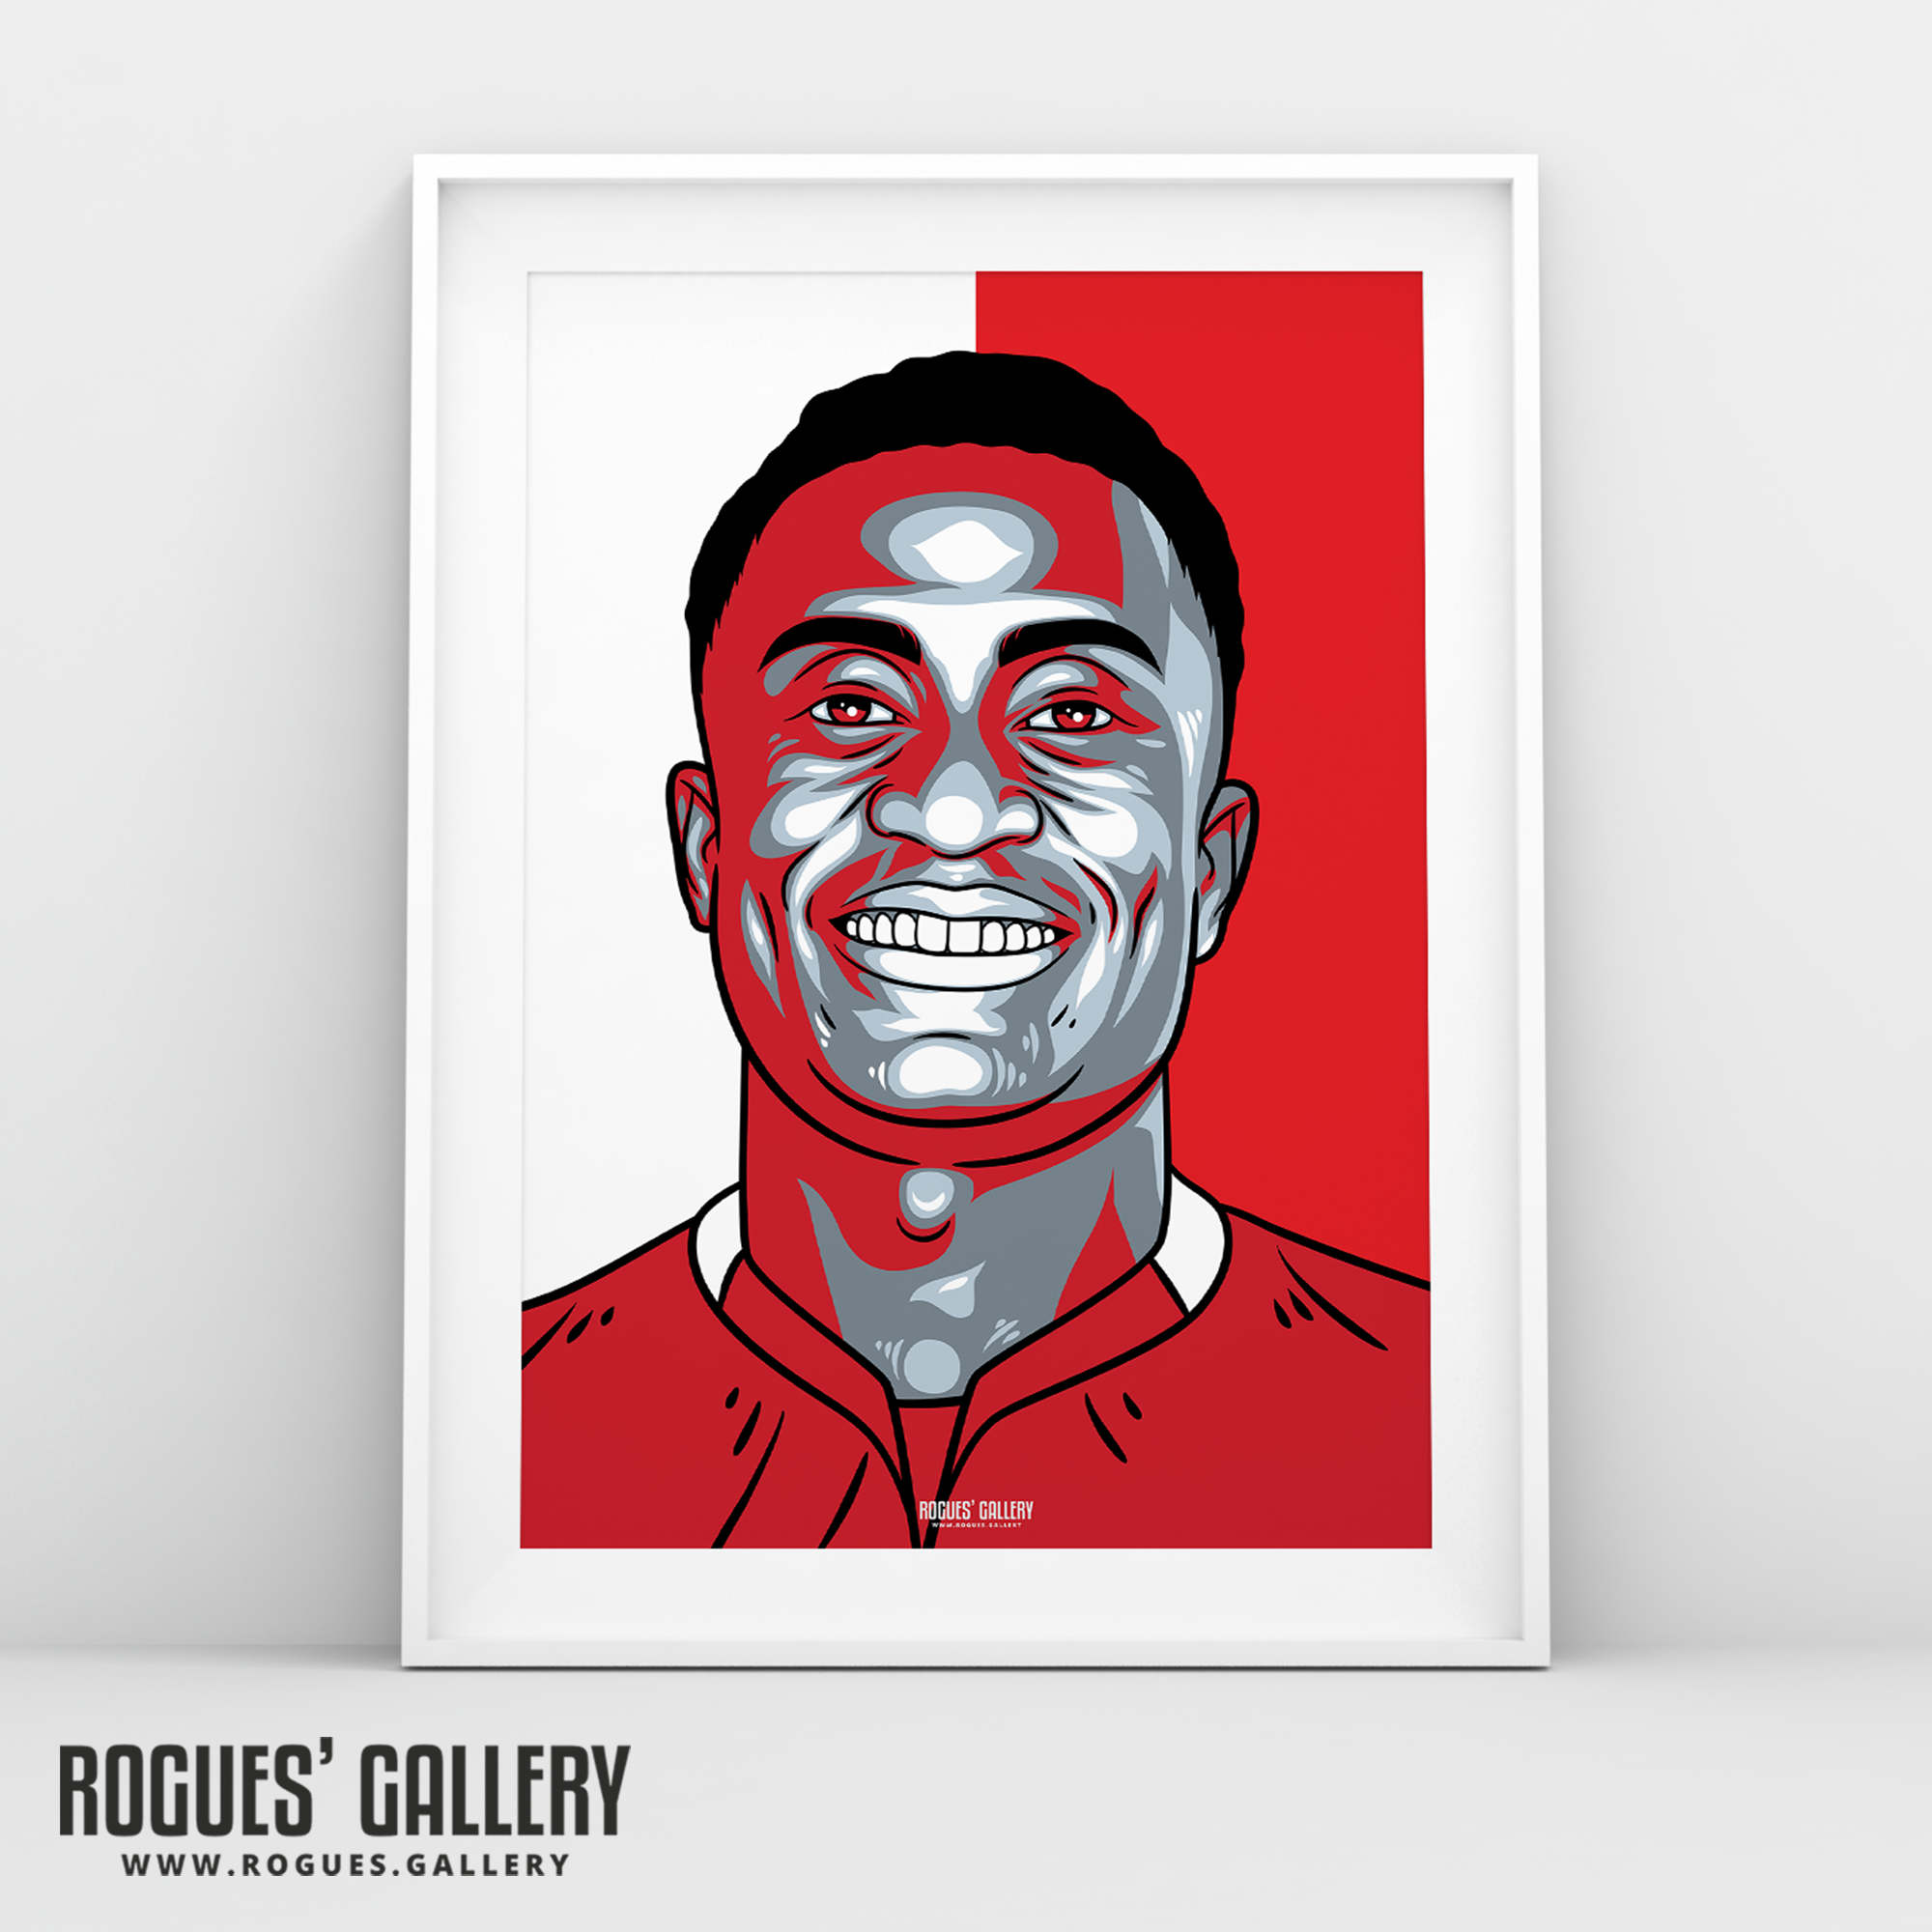 Richie Laryea Nottingham Forest Canadian full back A3 print